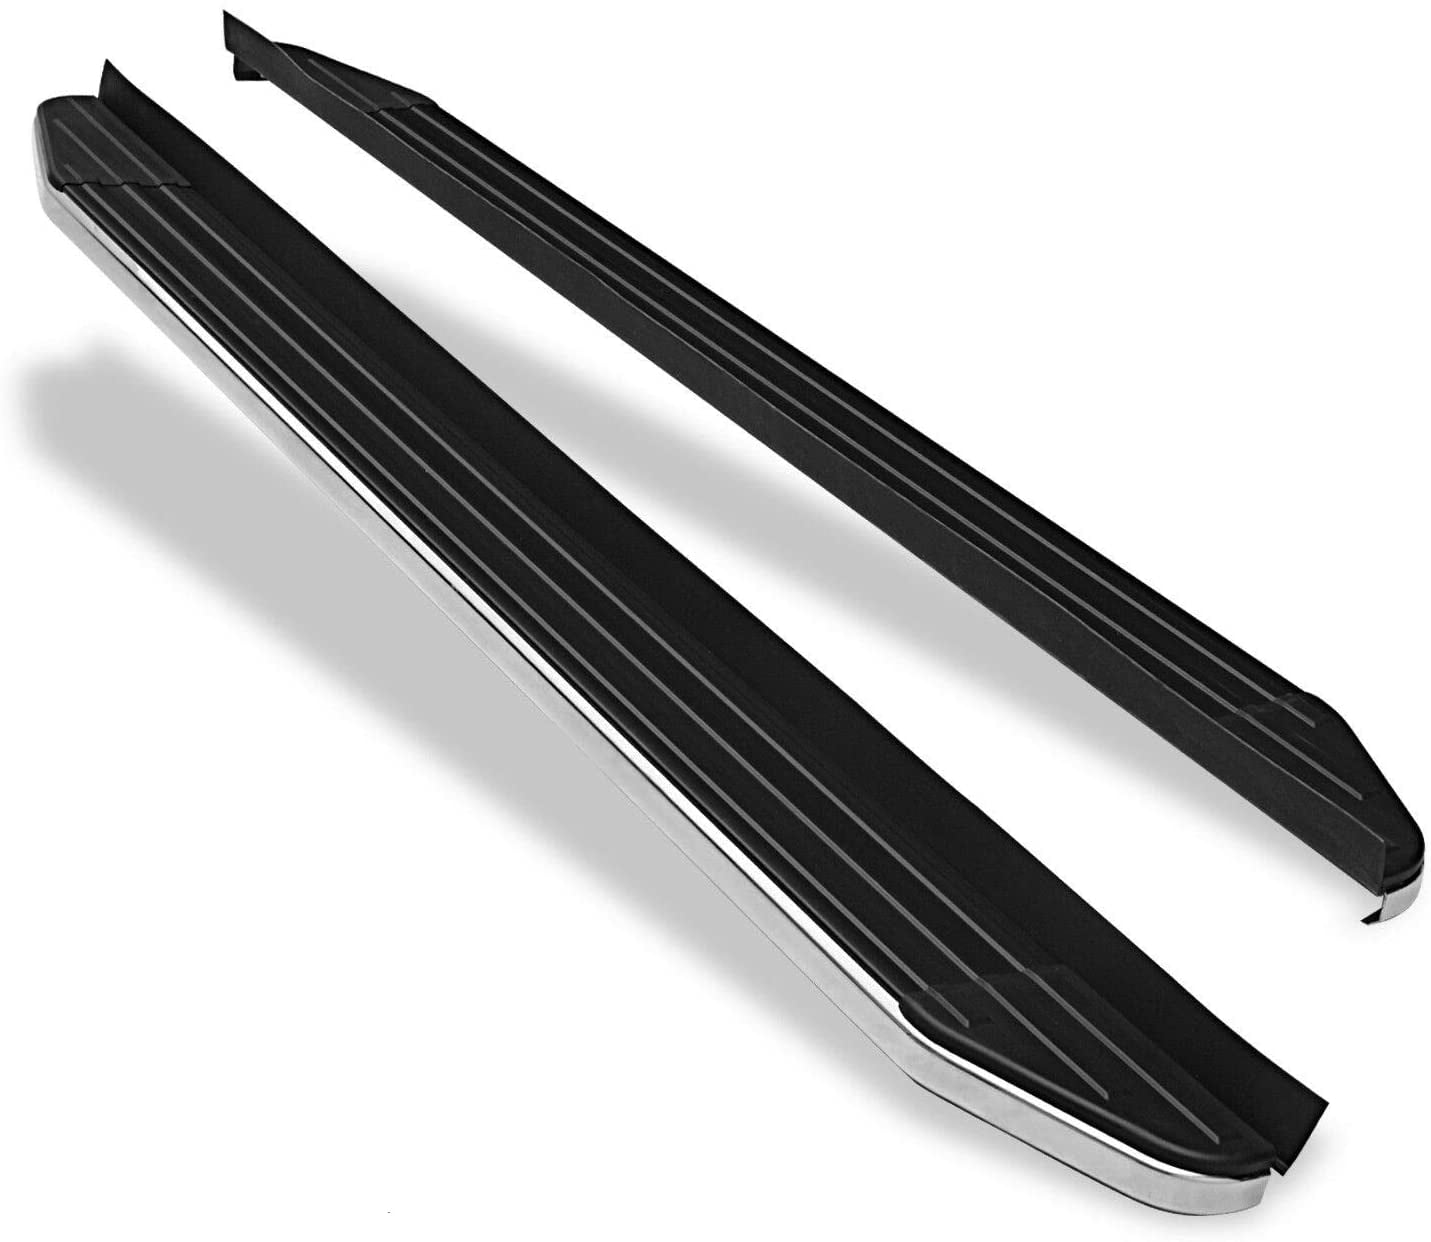 Excl. R/T Models TAC Running Boards Fit 2011-2019 Dodge Durango Value Aluminum SUV Black Side Steps Nerf Bars Step Rails Running Boards Off Road Exterior Accessories 2 Pieces Running Boards